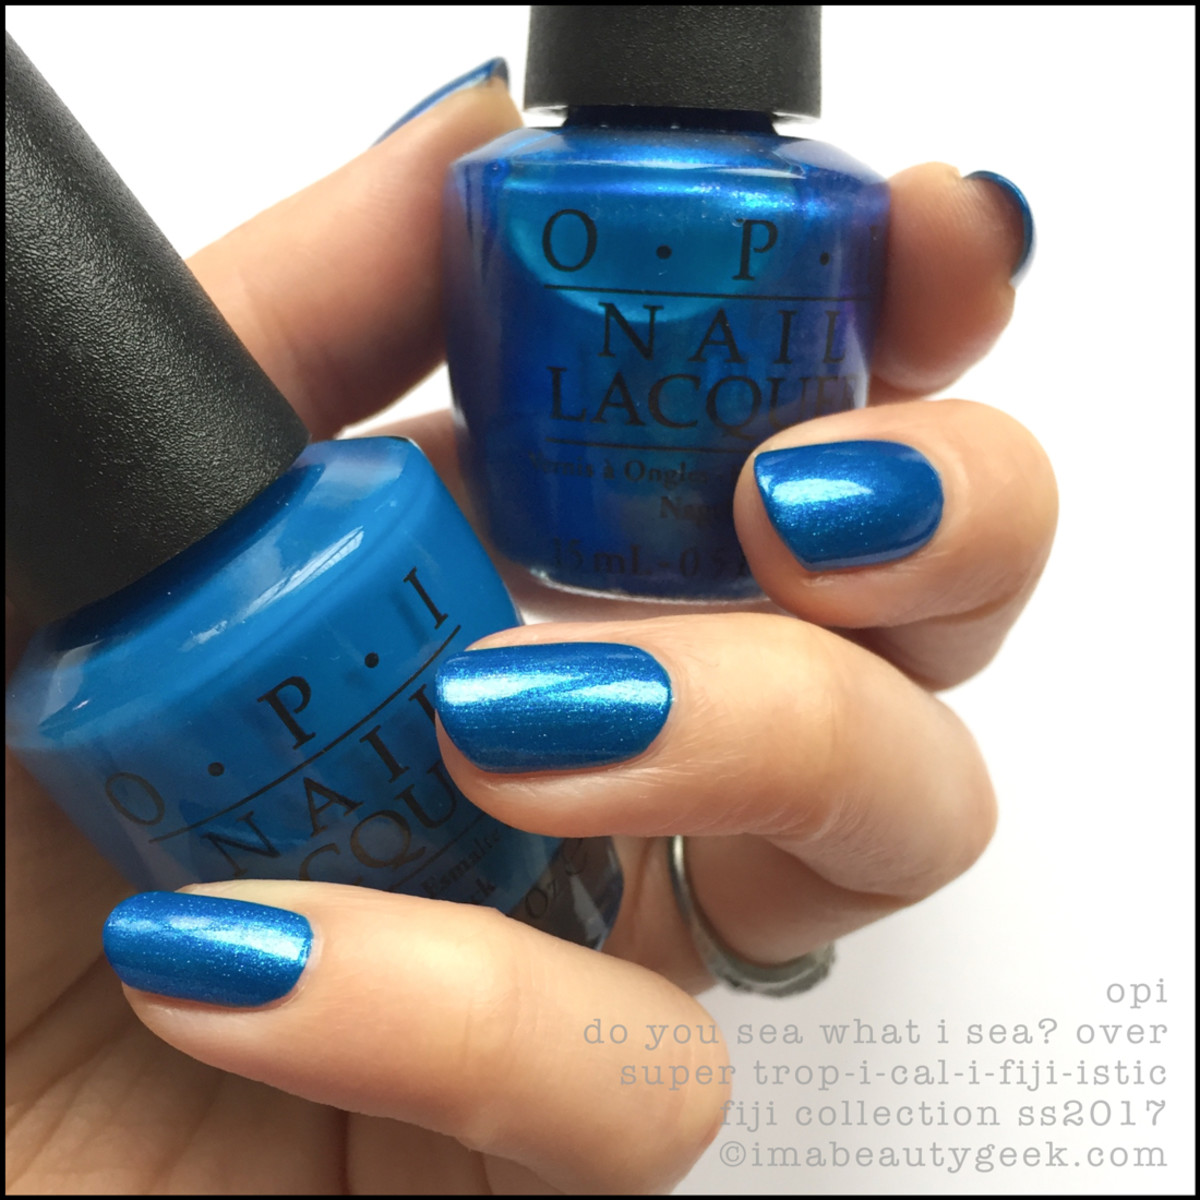 OPI Do You Sea What I Sea? over Super Tropicalifijiistic_OPI Fiji Collection Swatches Review 2017